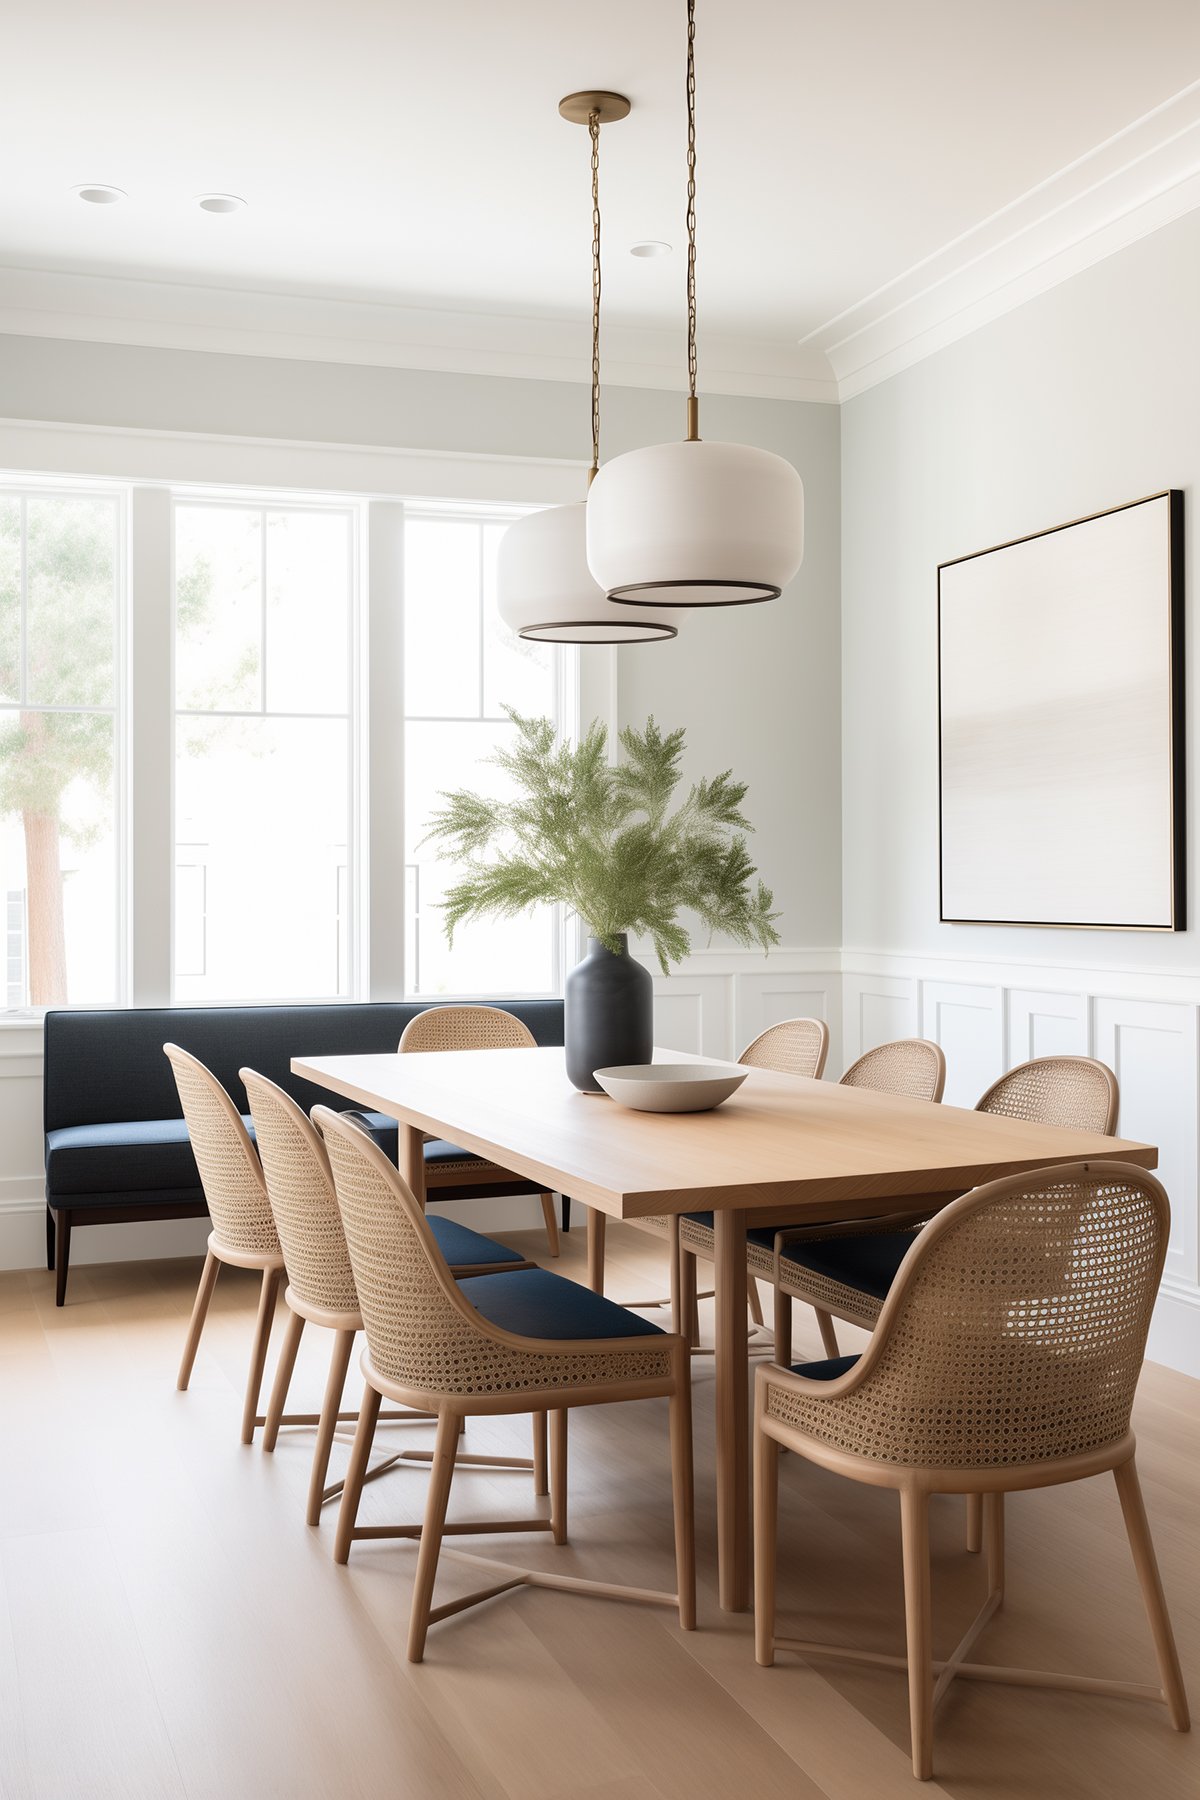 dining room with wooden table and chairs, pendant lights and walls painted Sherwin Williams Drift of Mist.